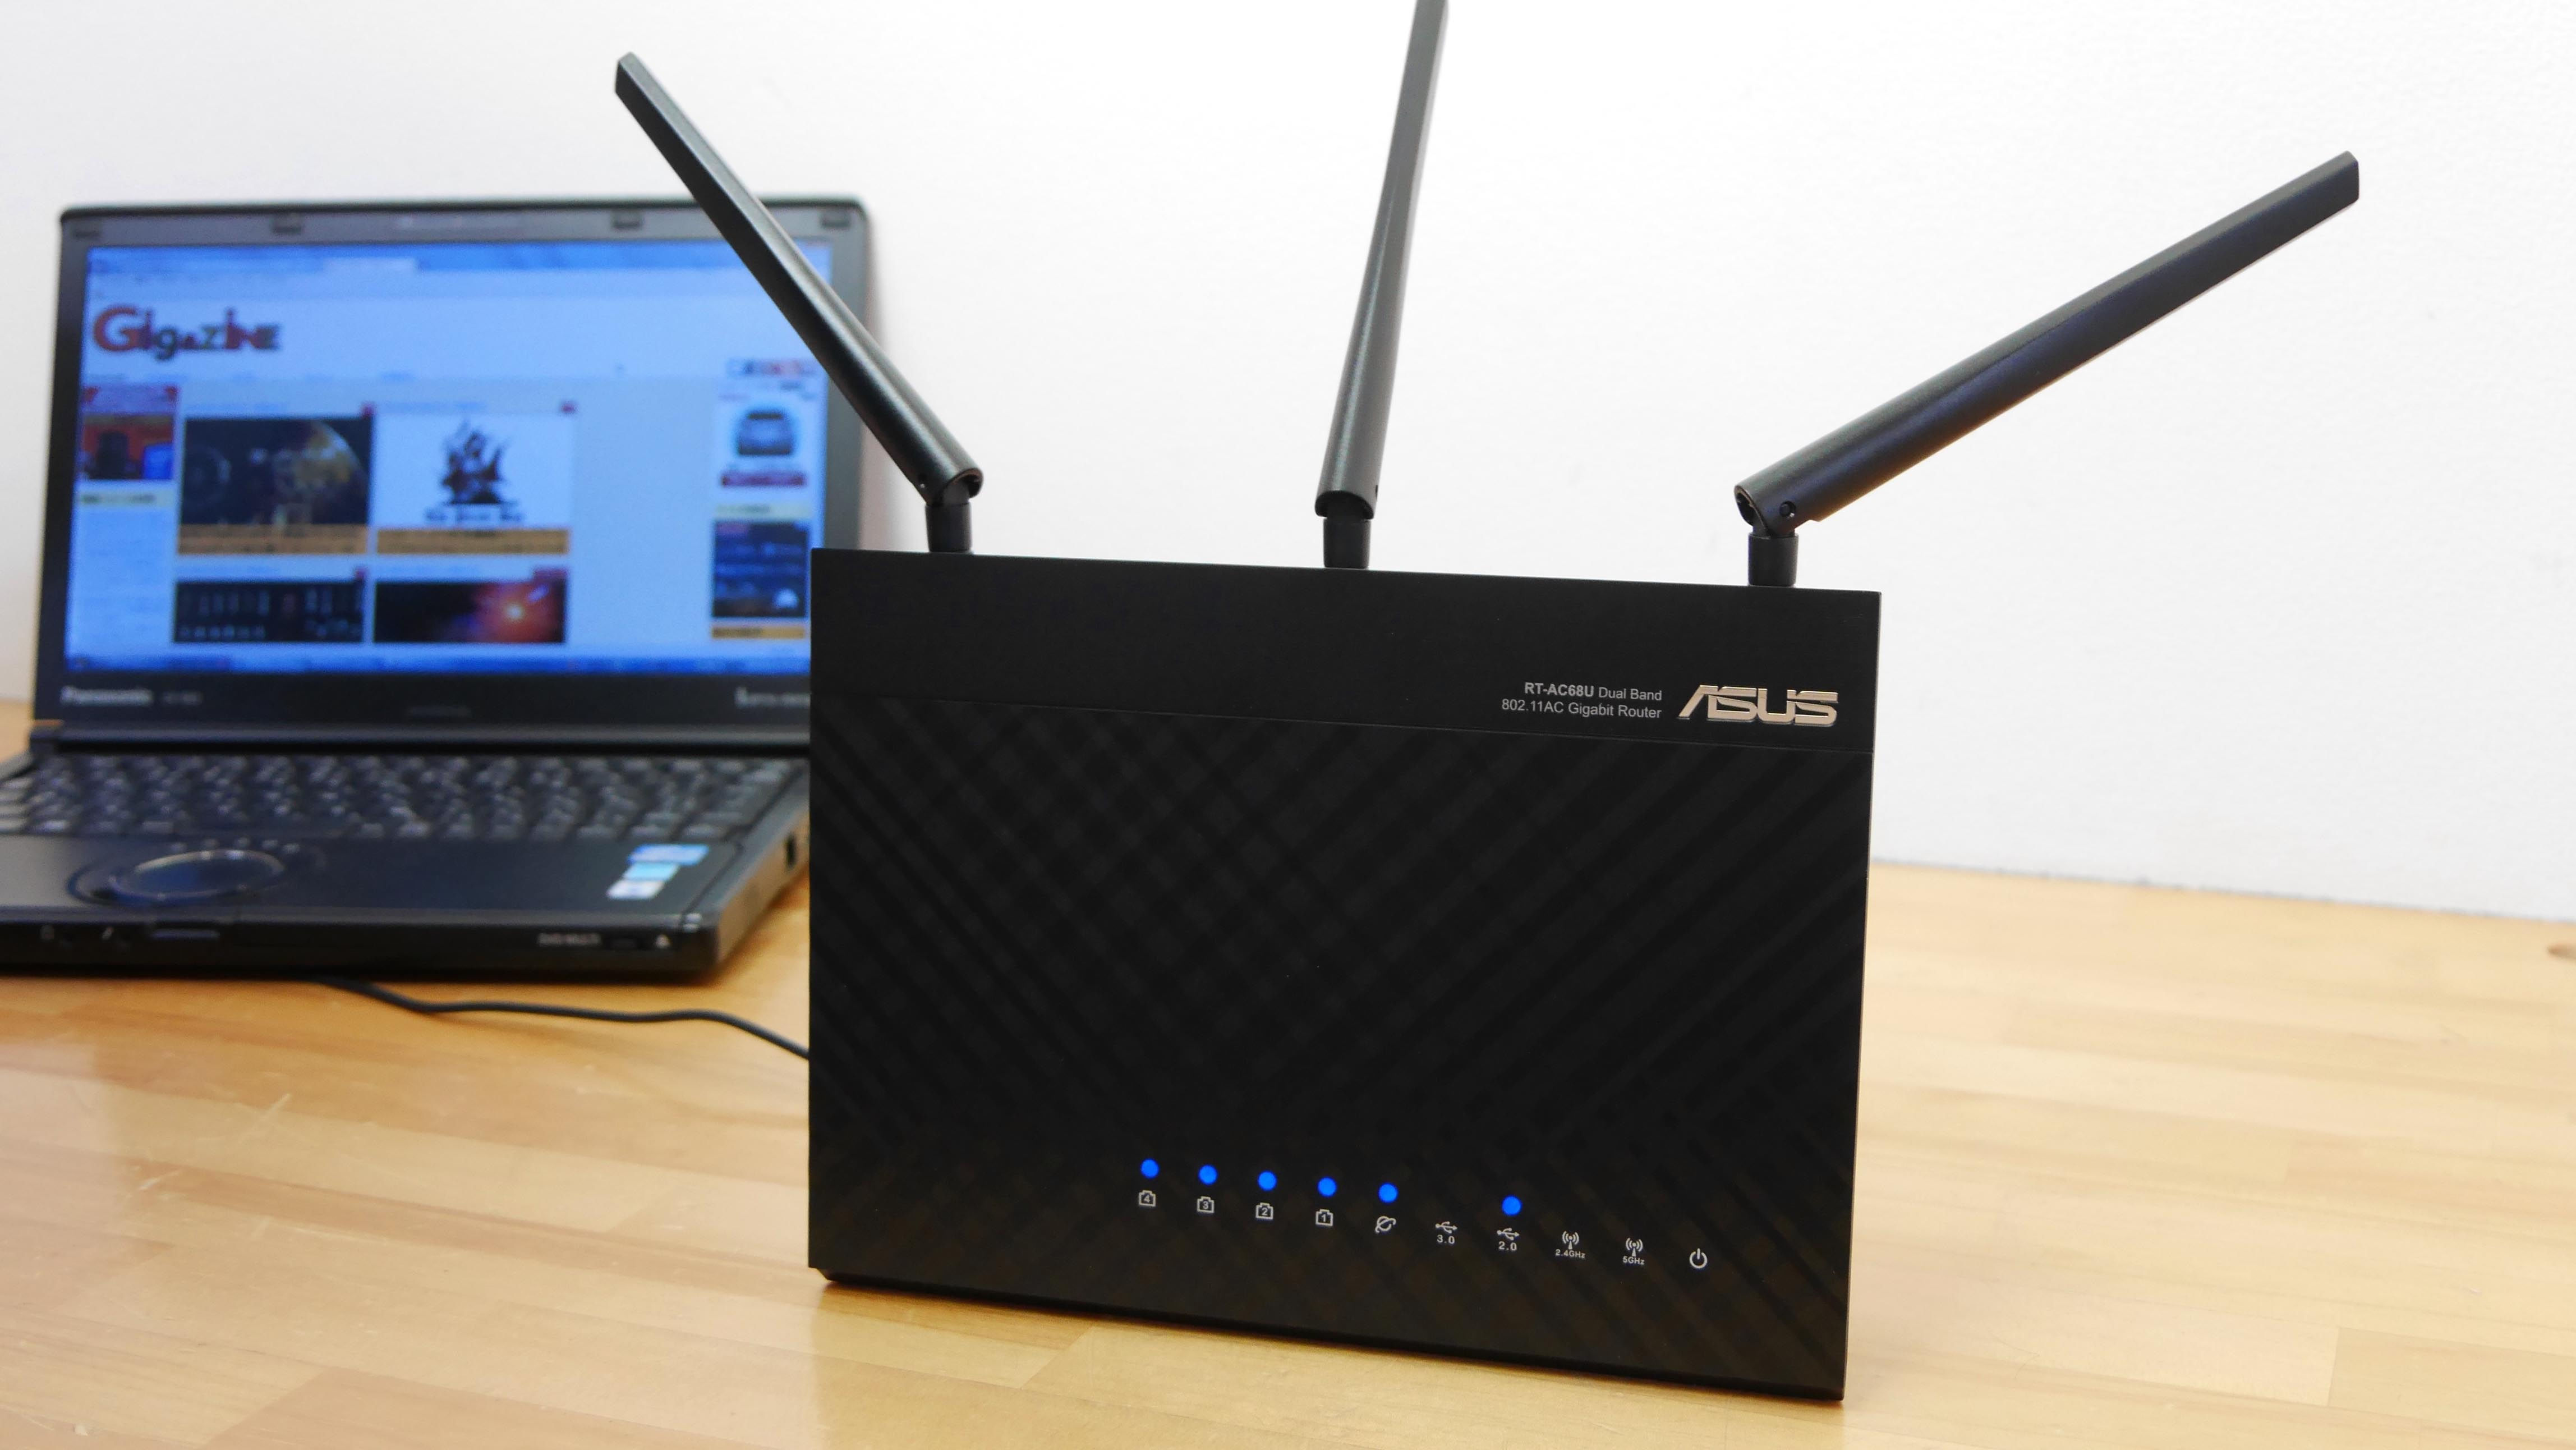 Asus RT-AC88U Review: A Router to Love